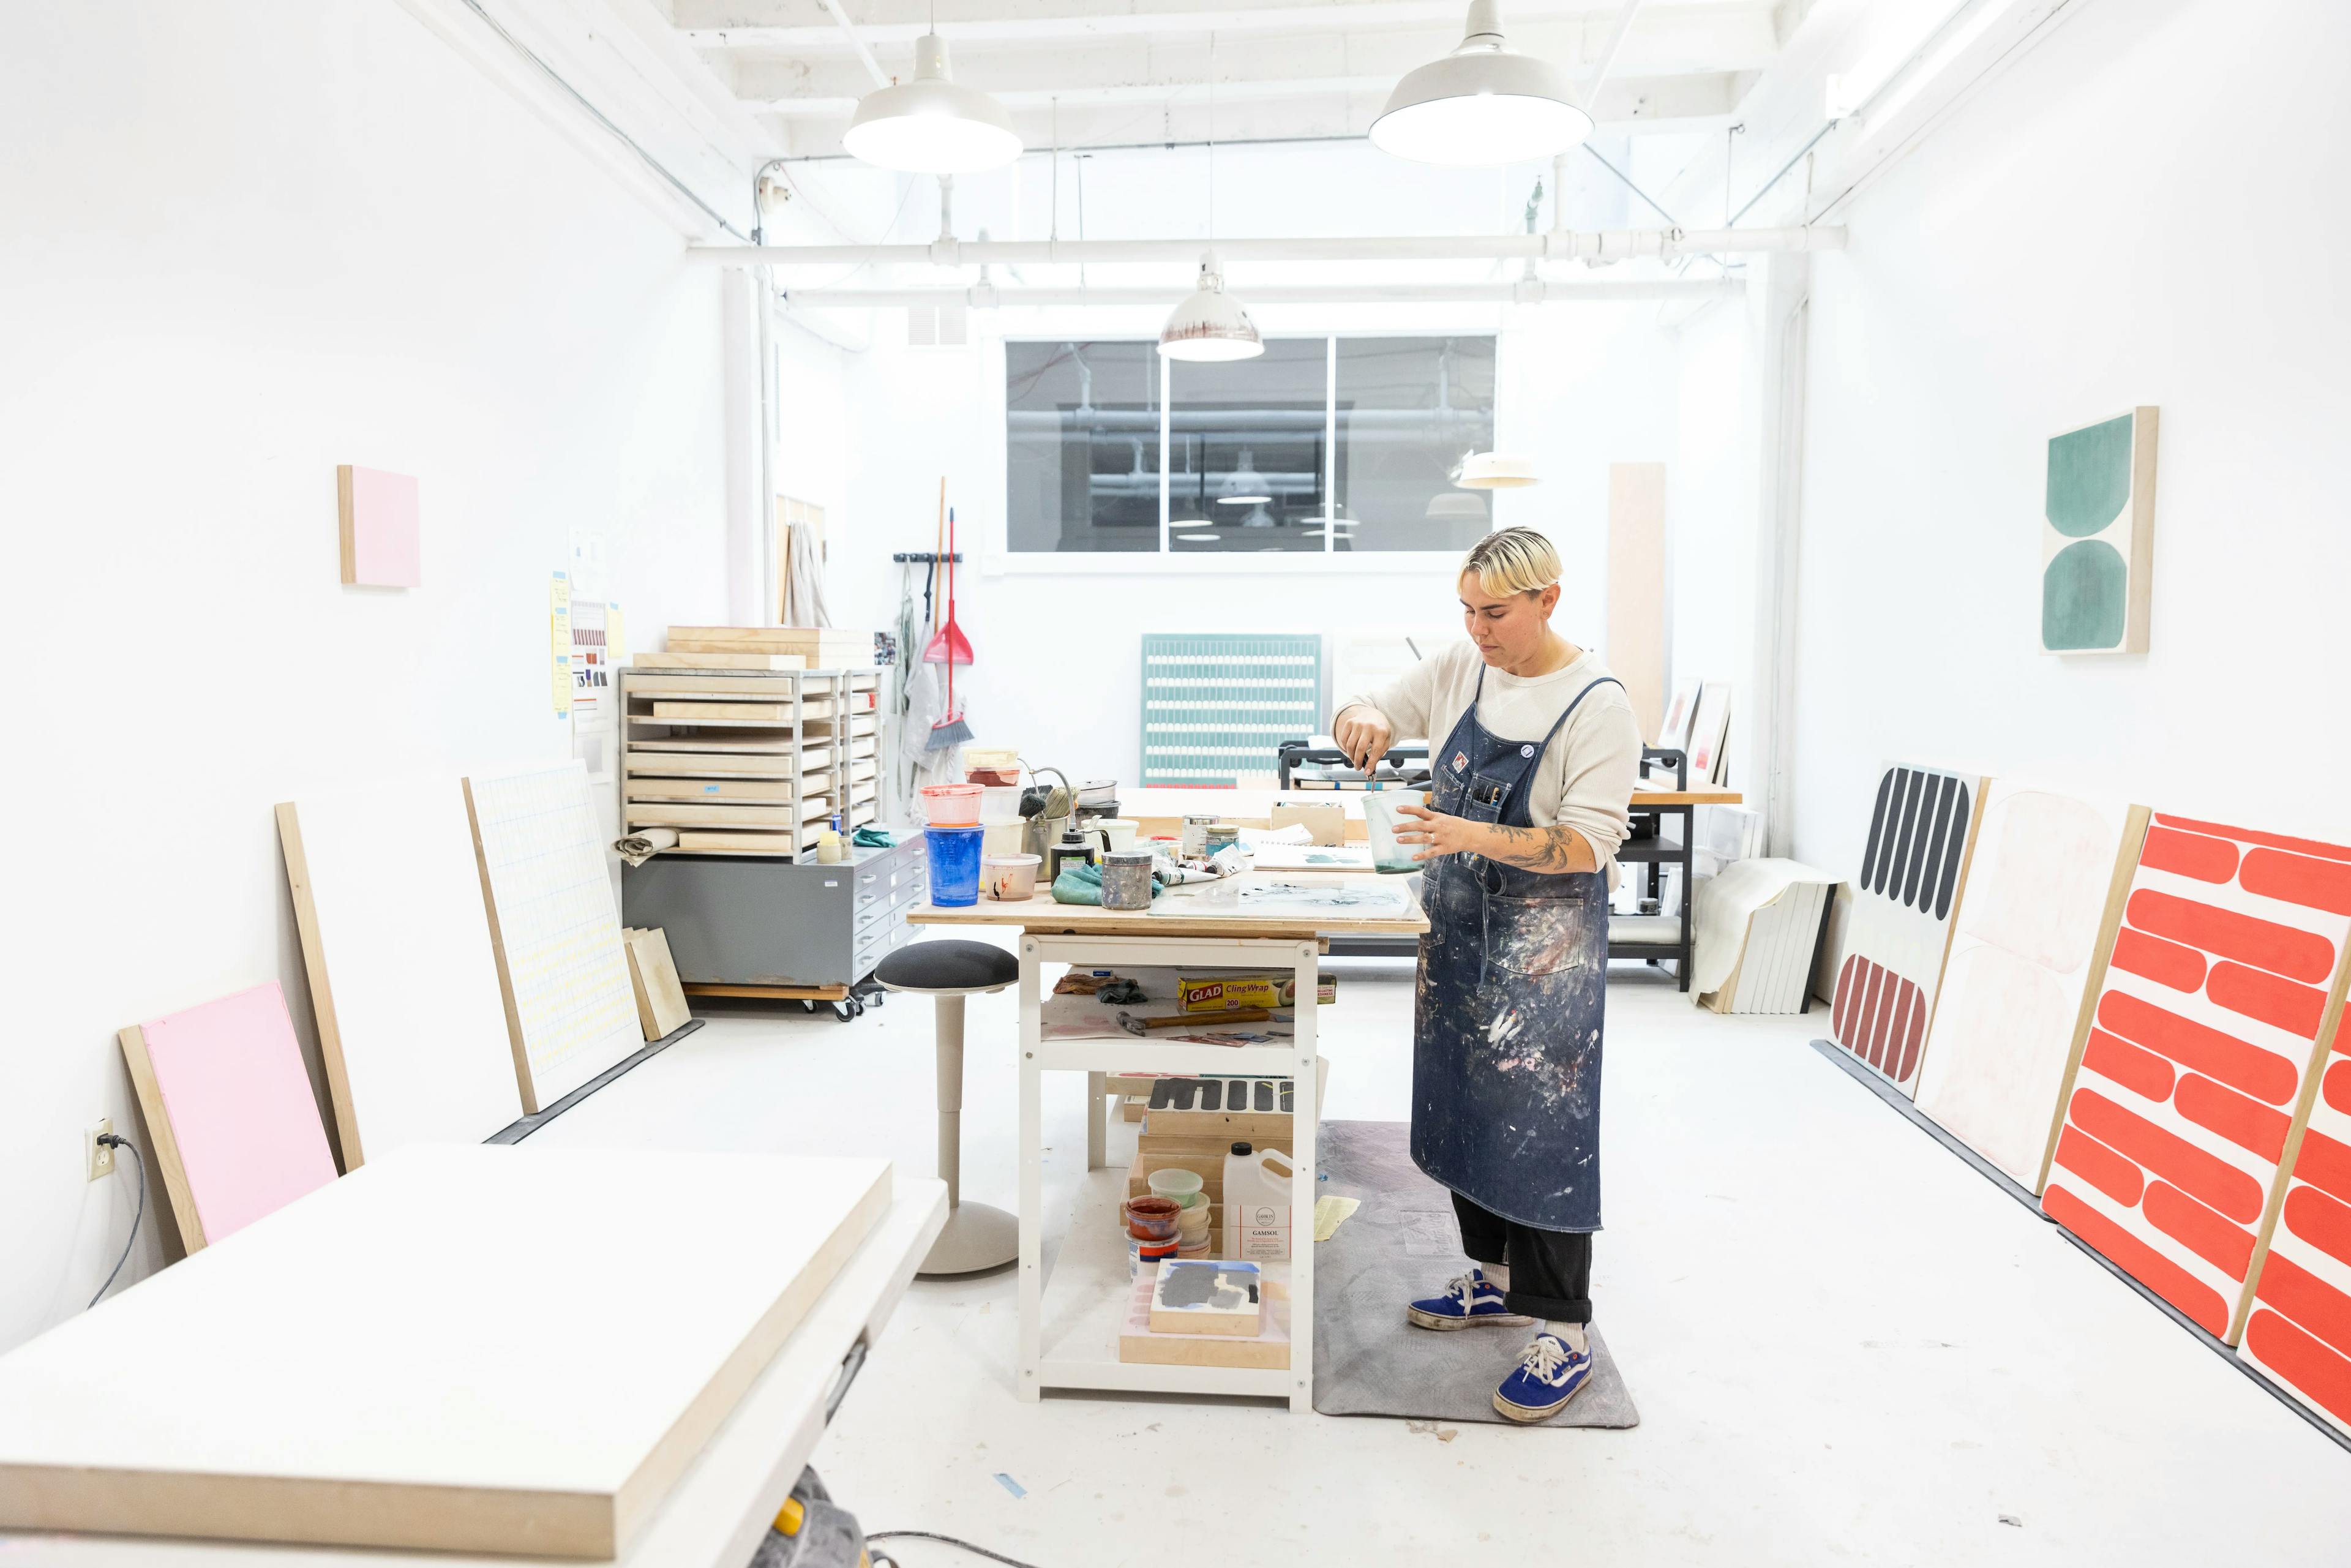 Artist Arielle Zamora working in their studio, surrounded by minimalist, geometric works on panel.